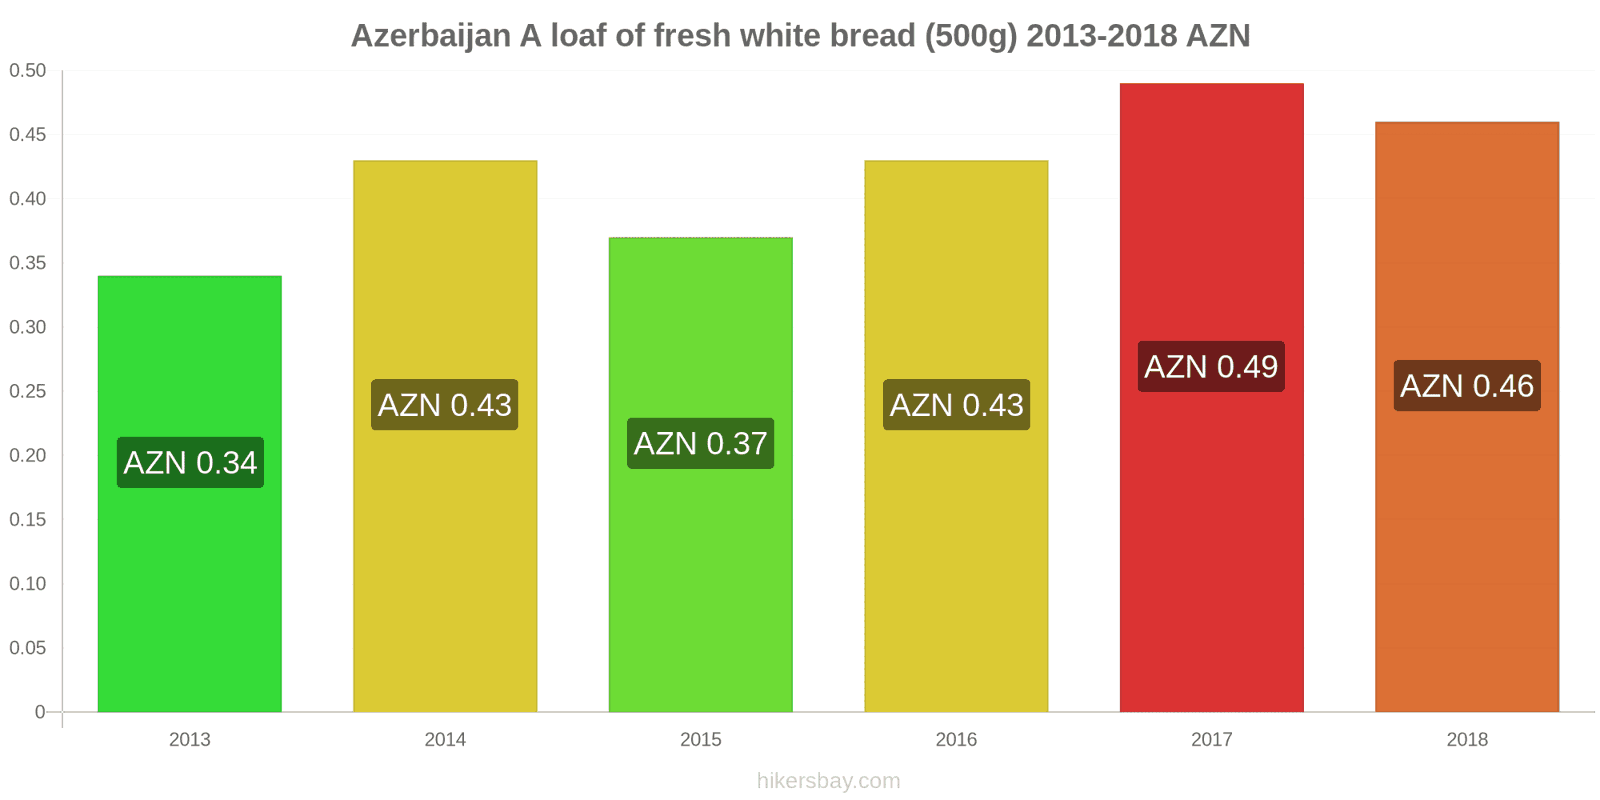 Azerbaijan price changes A loaf of fresh white bread (500g) hikersbay.com